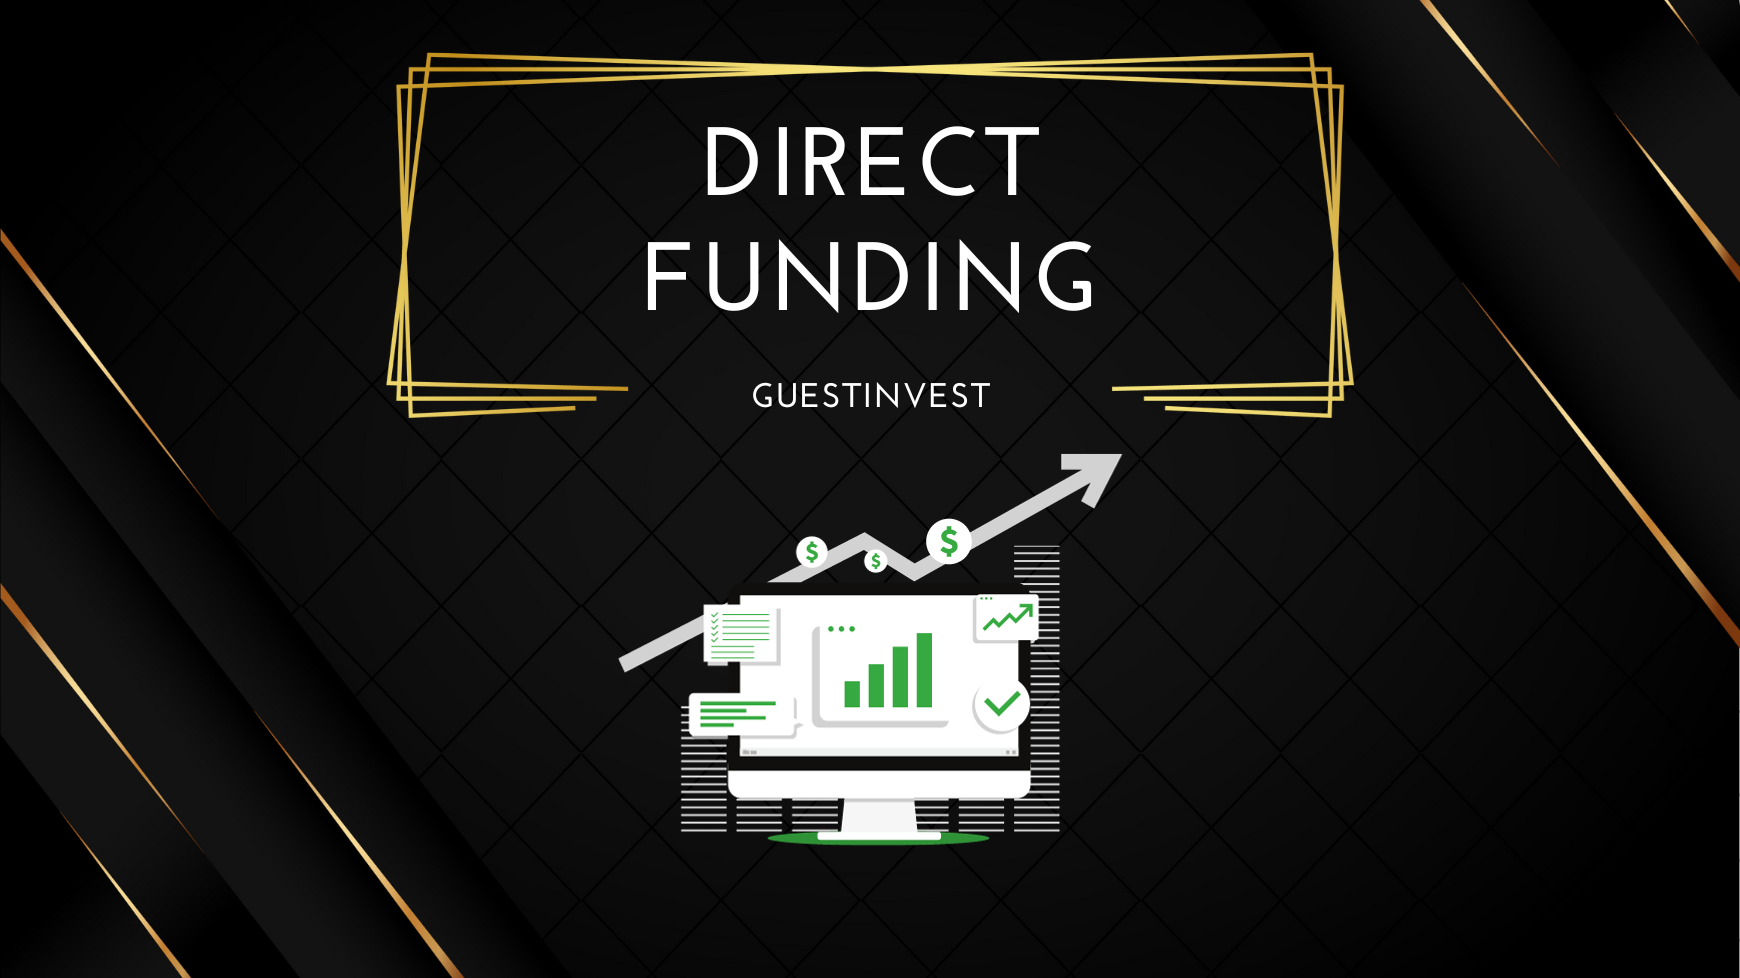 In this article, we are going to go through which proprietary trading firms listed on our website offer direct funding programs.